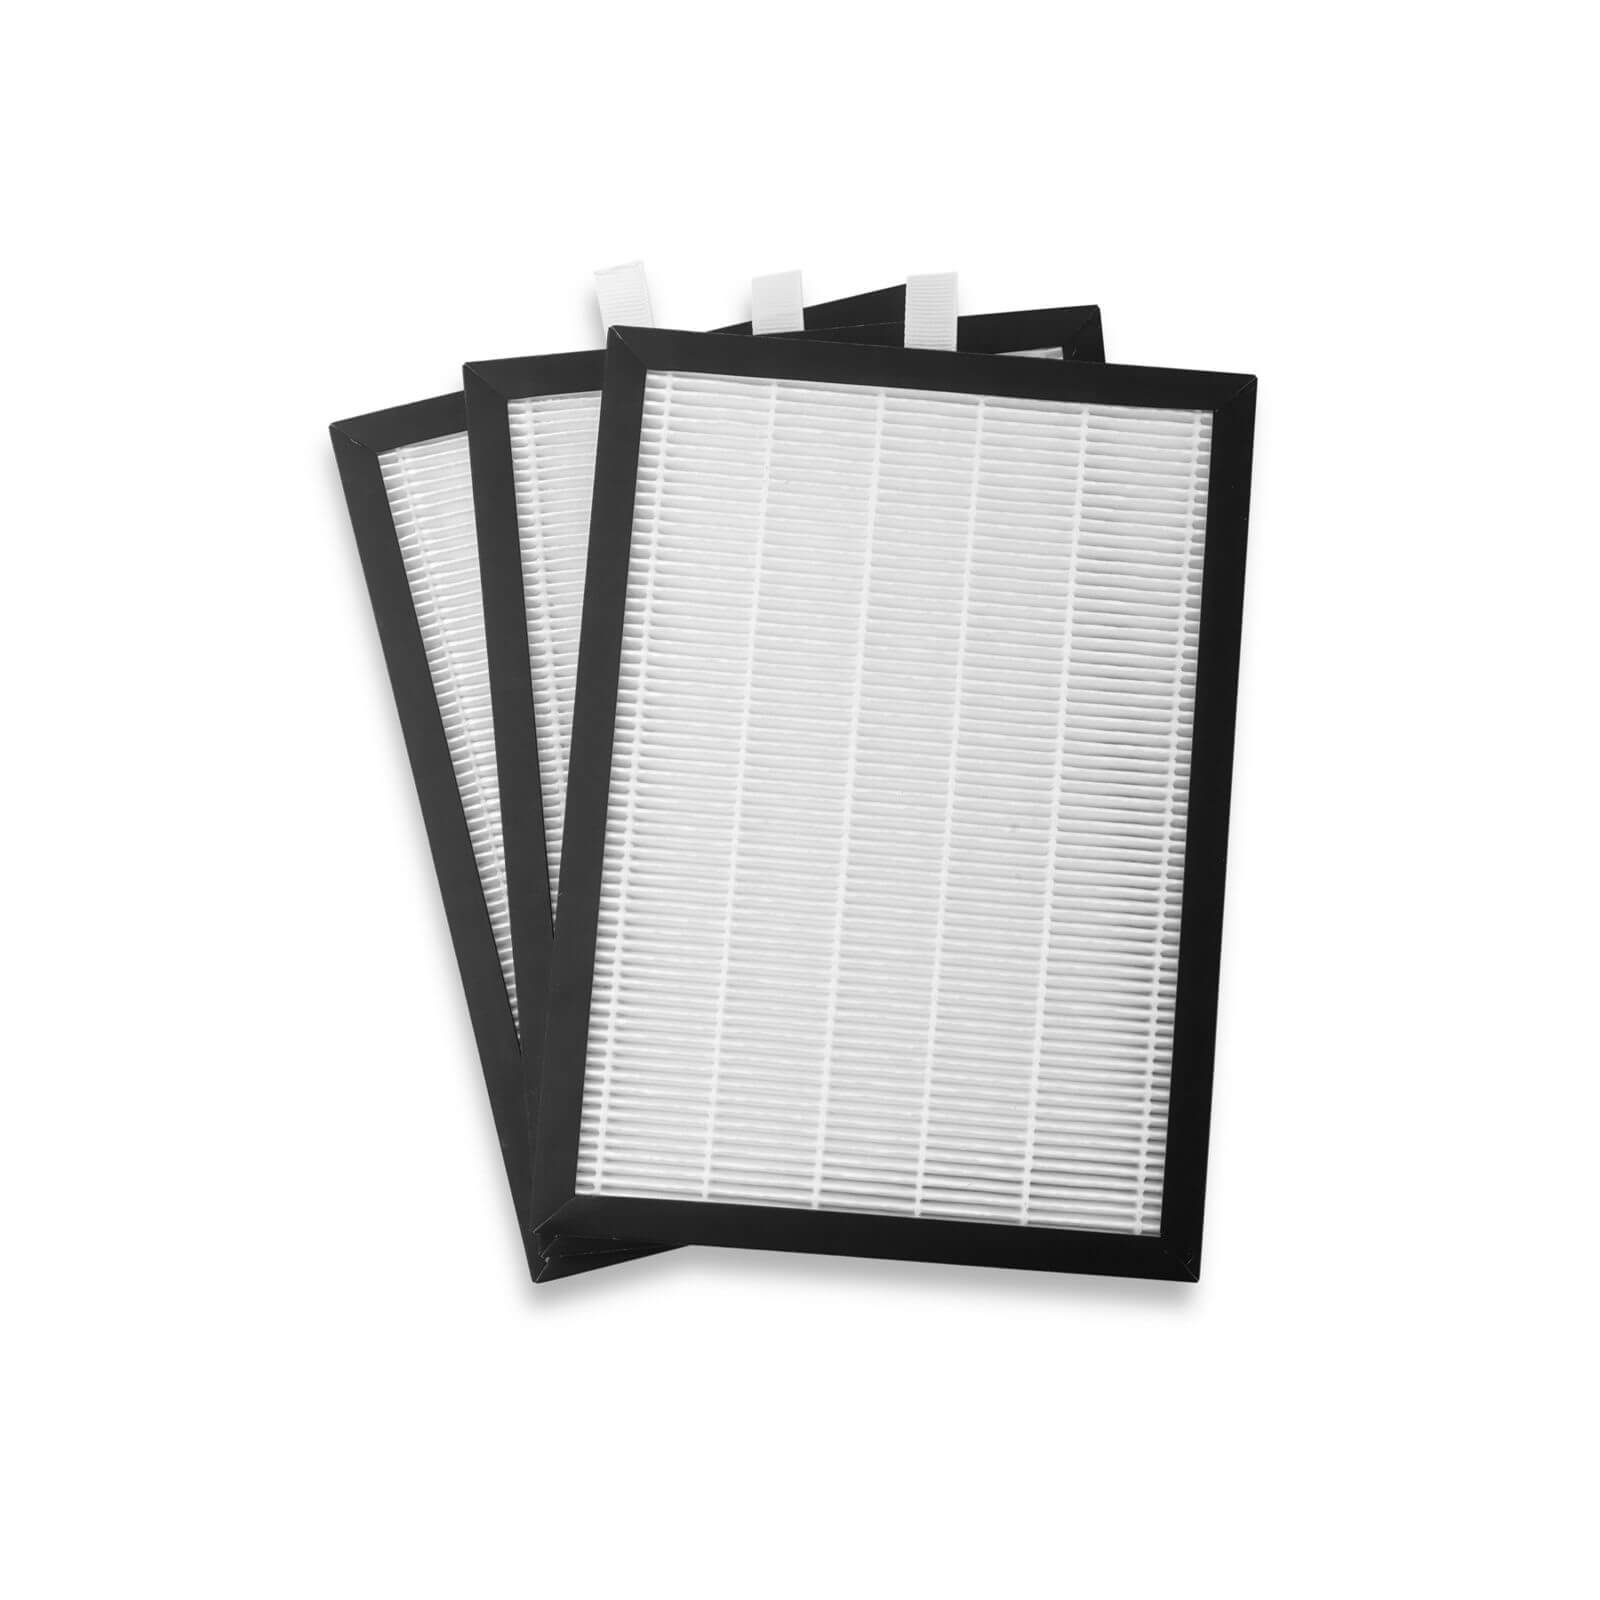 Photo of Meaco Low Energy Platinum Dehumidifier 12 Litre Replacement Hepa Filters - 3 Pack